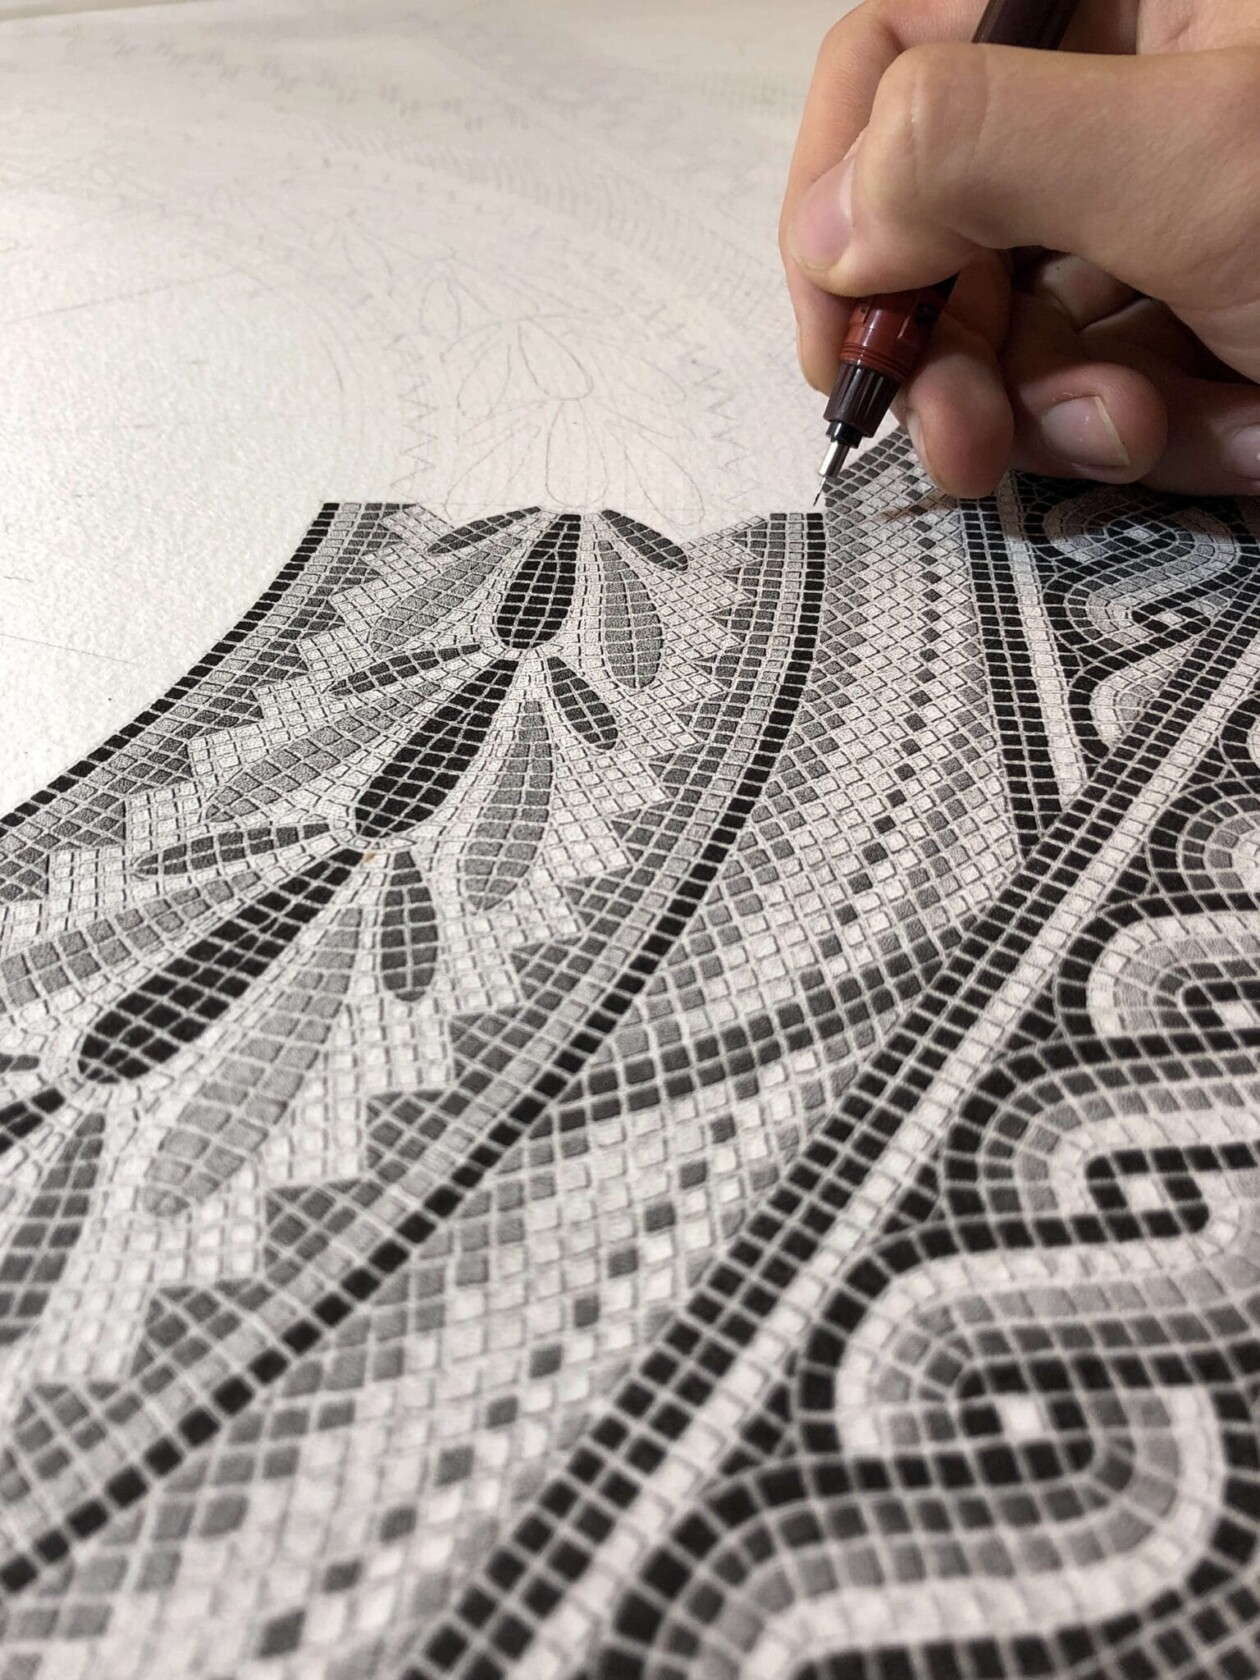 Detailed Stipple Illustrations Made Of Tens Of Millions Of Ink Dots By Xavier Casalta (17)